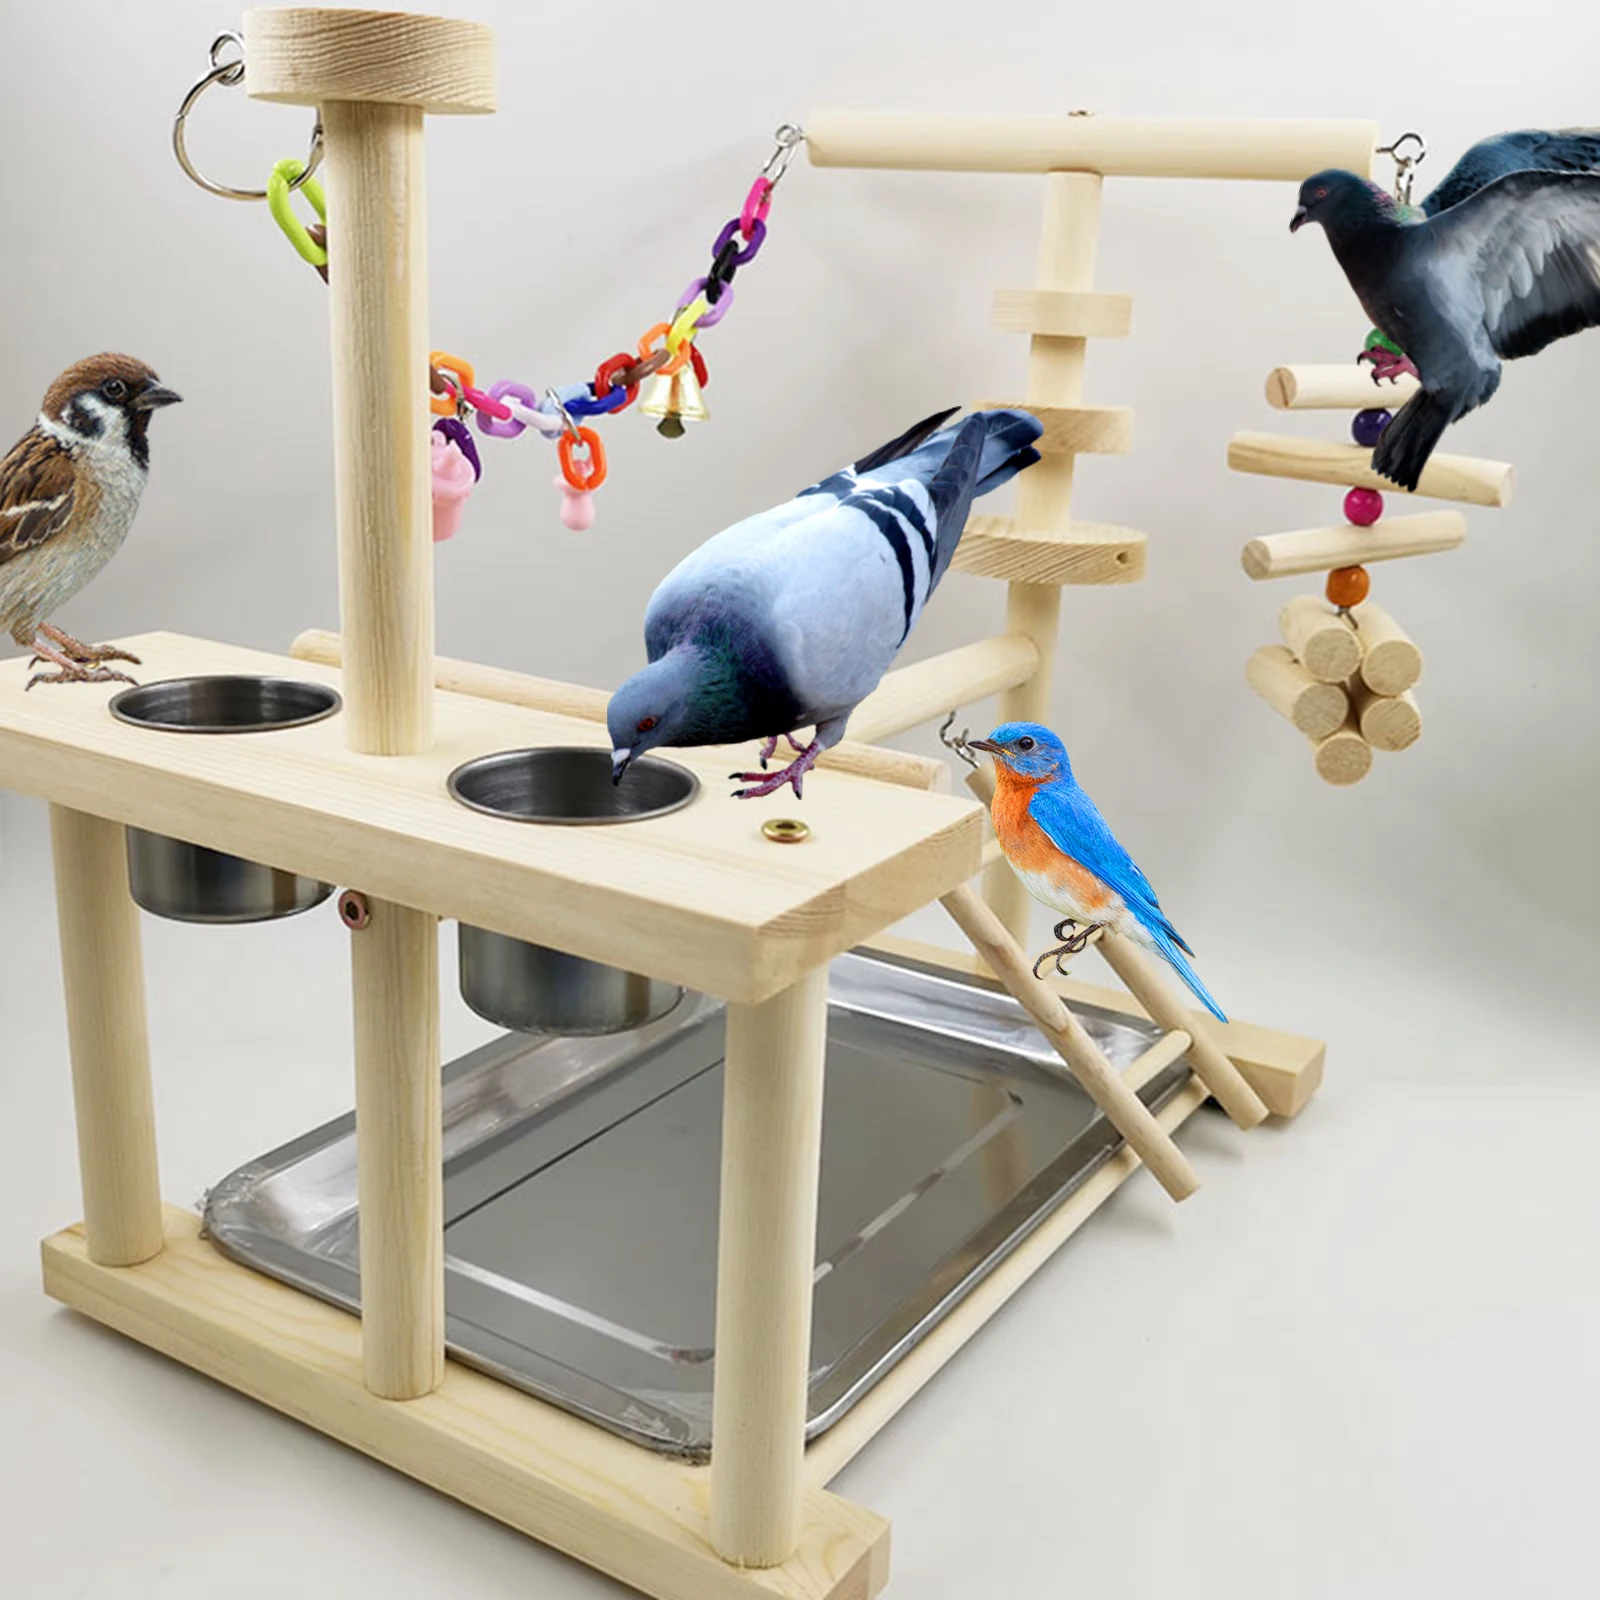 Parrot Playstand Bird Play Stand Cockatiel Playground Wood Perch Gym Playpen Ladder with Feeder Cups Toys 